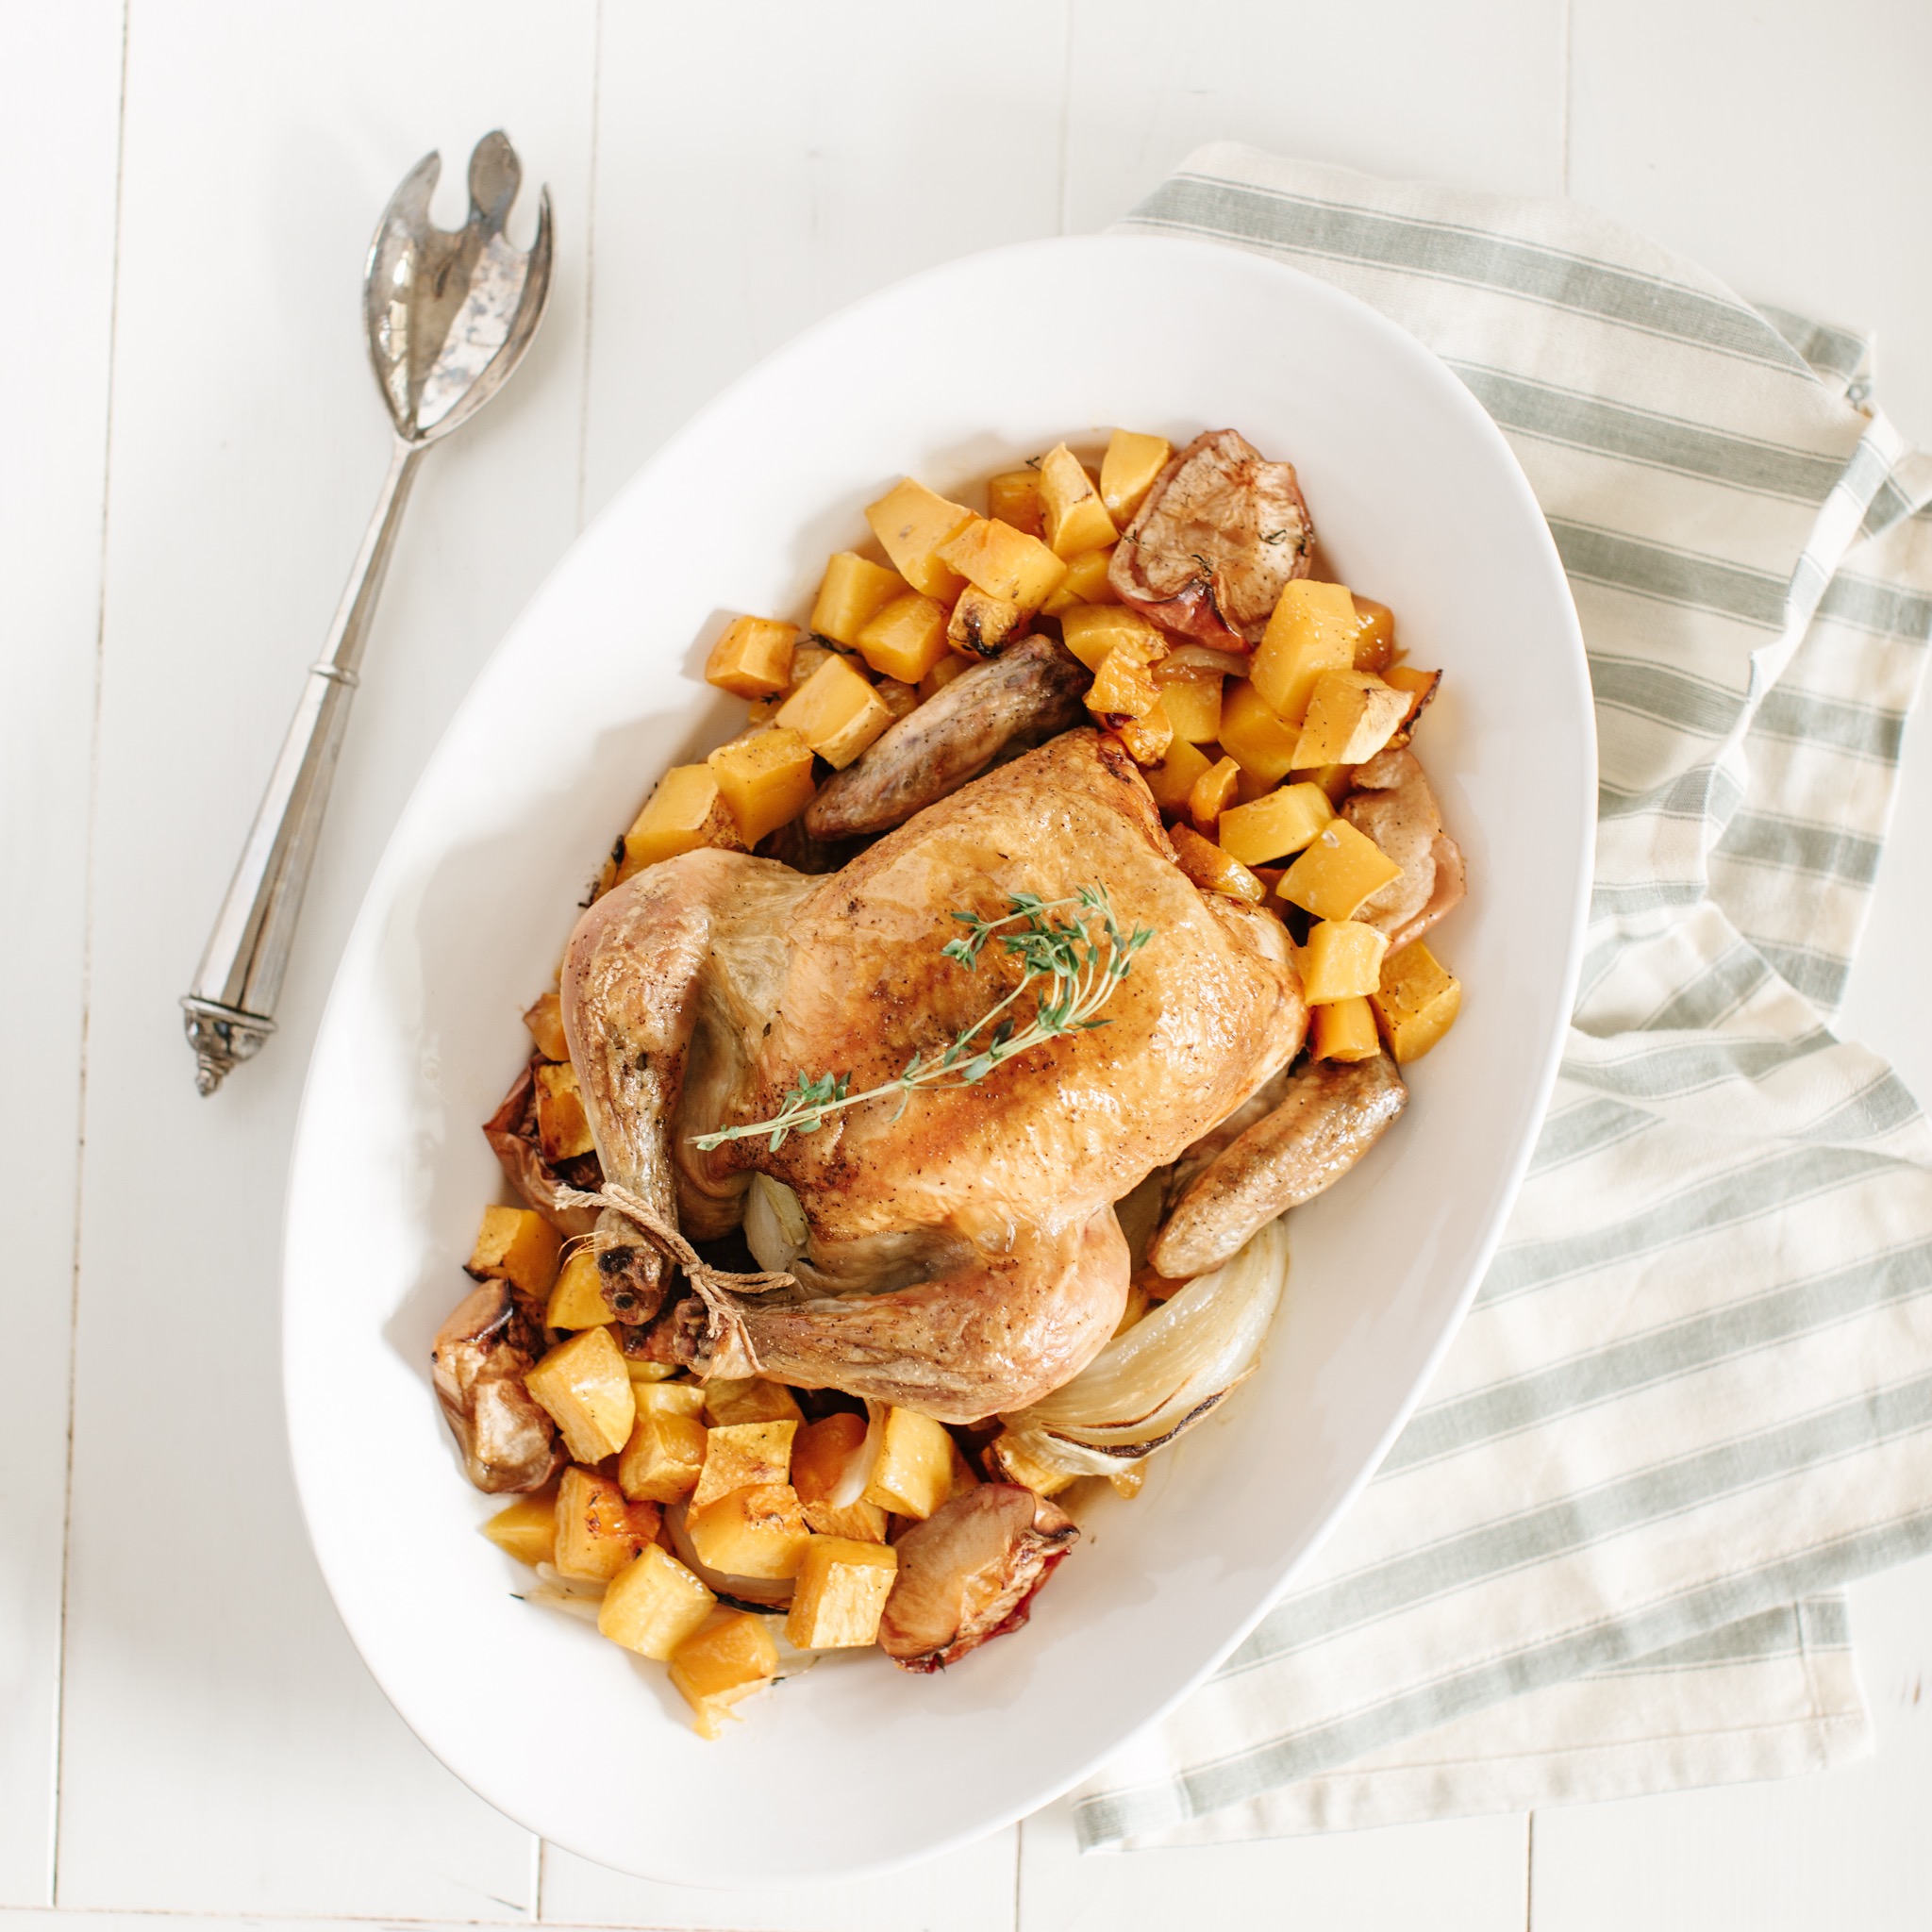 Roasted Sheetpan Chicken with Apples and Butternut Squash